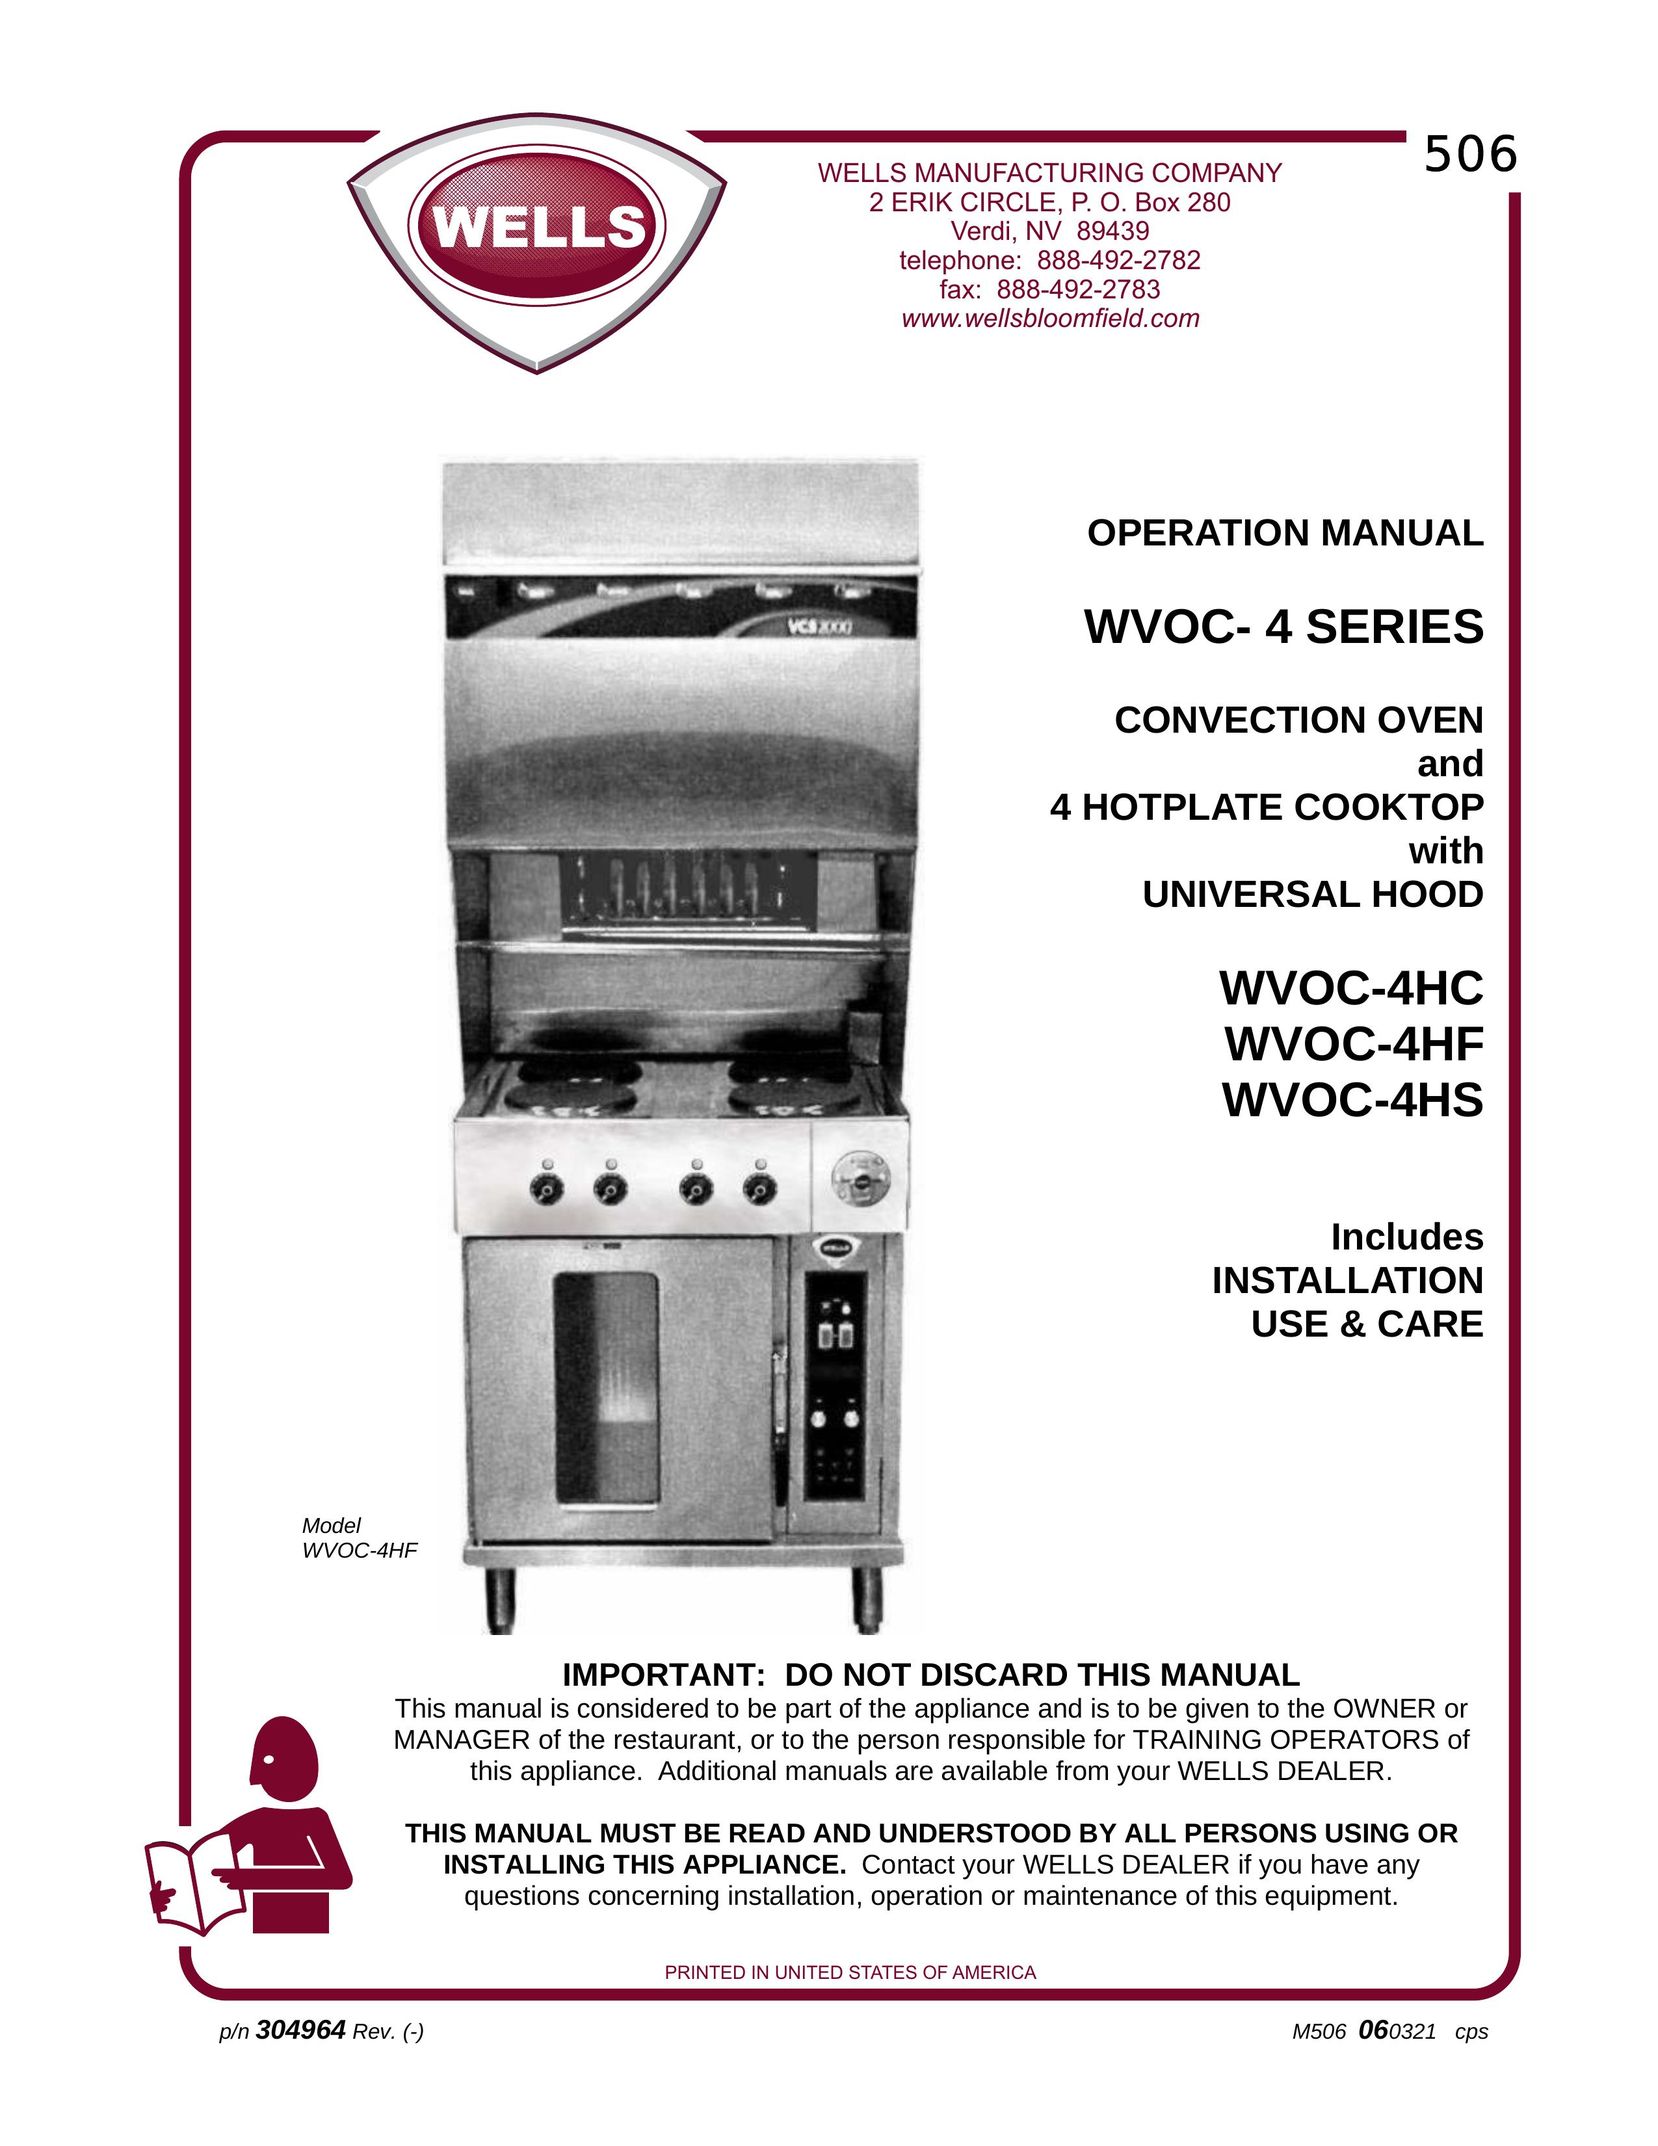 Wells WVOC-4HF Convection Oven User Manual